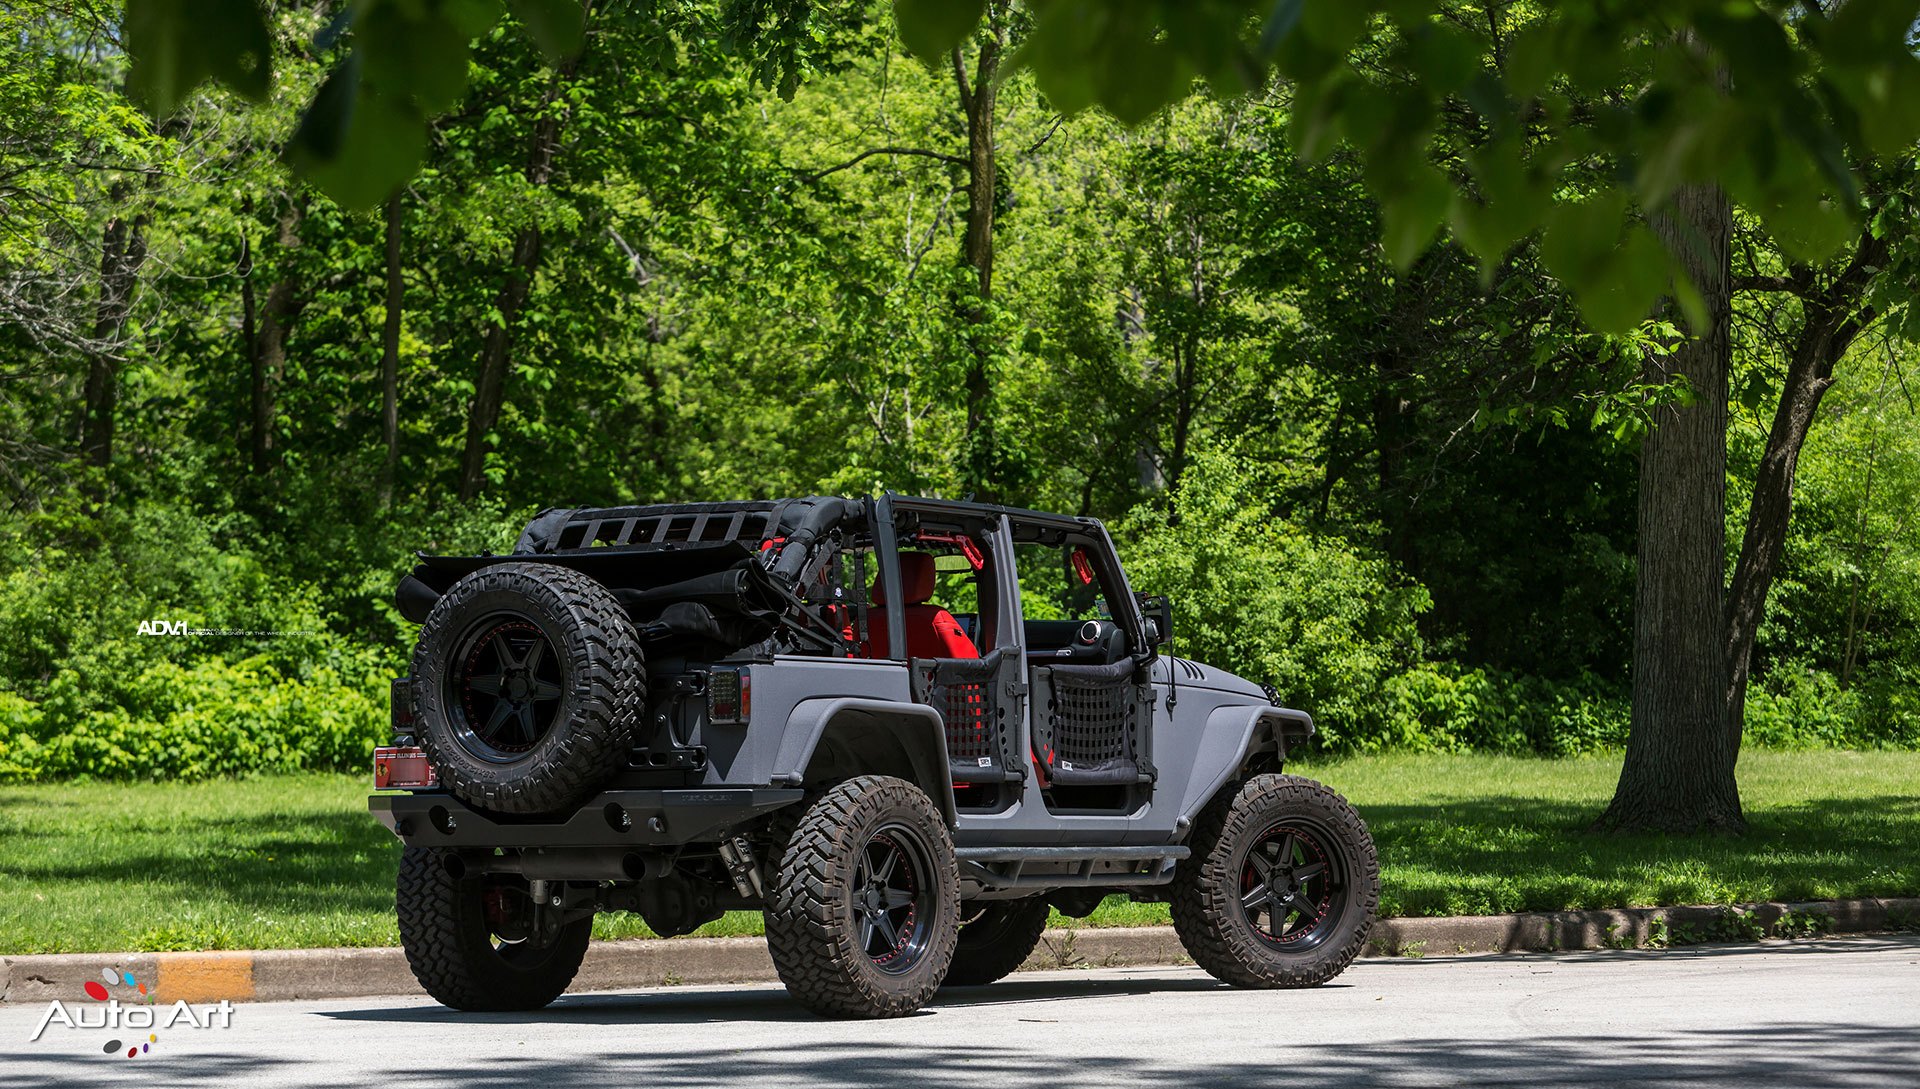 Gray Jeep Wrangler with Spare Tire Kit - Photo by ADV.1